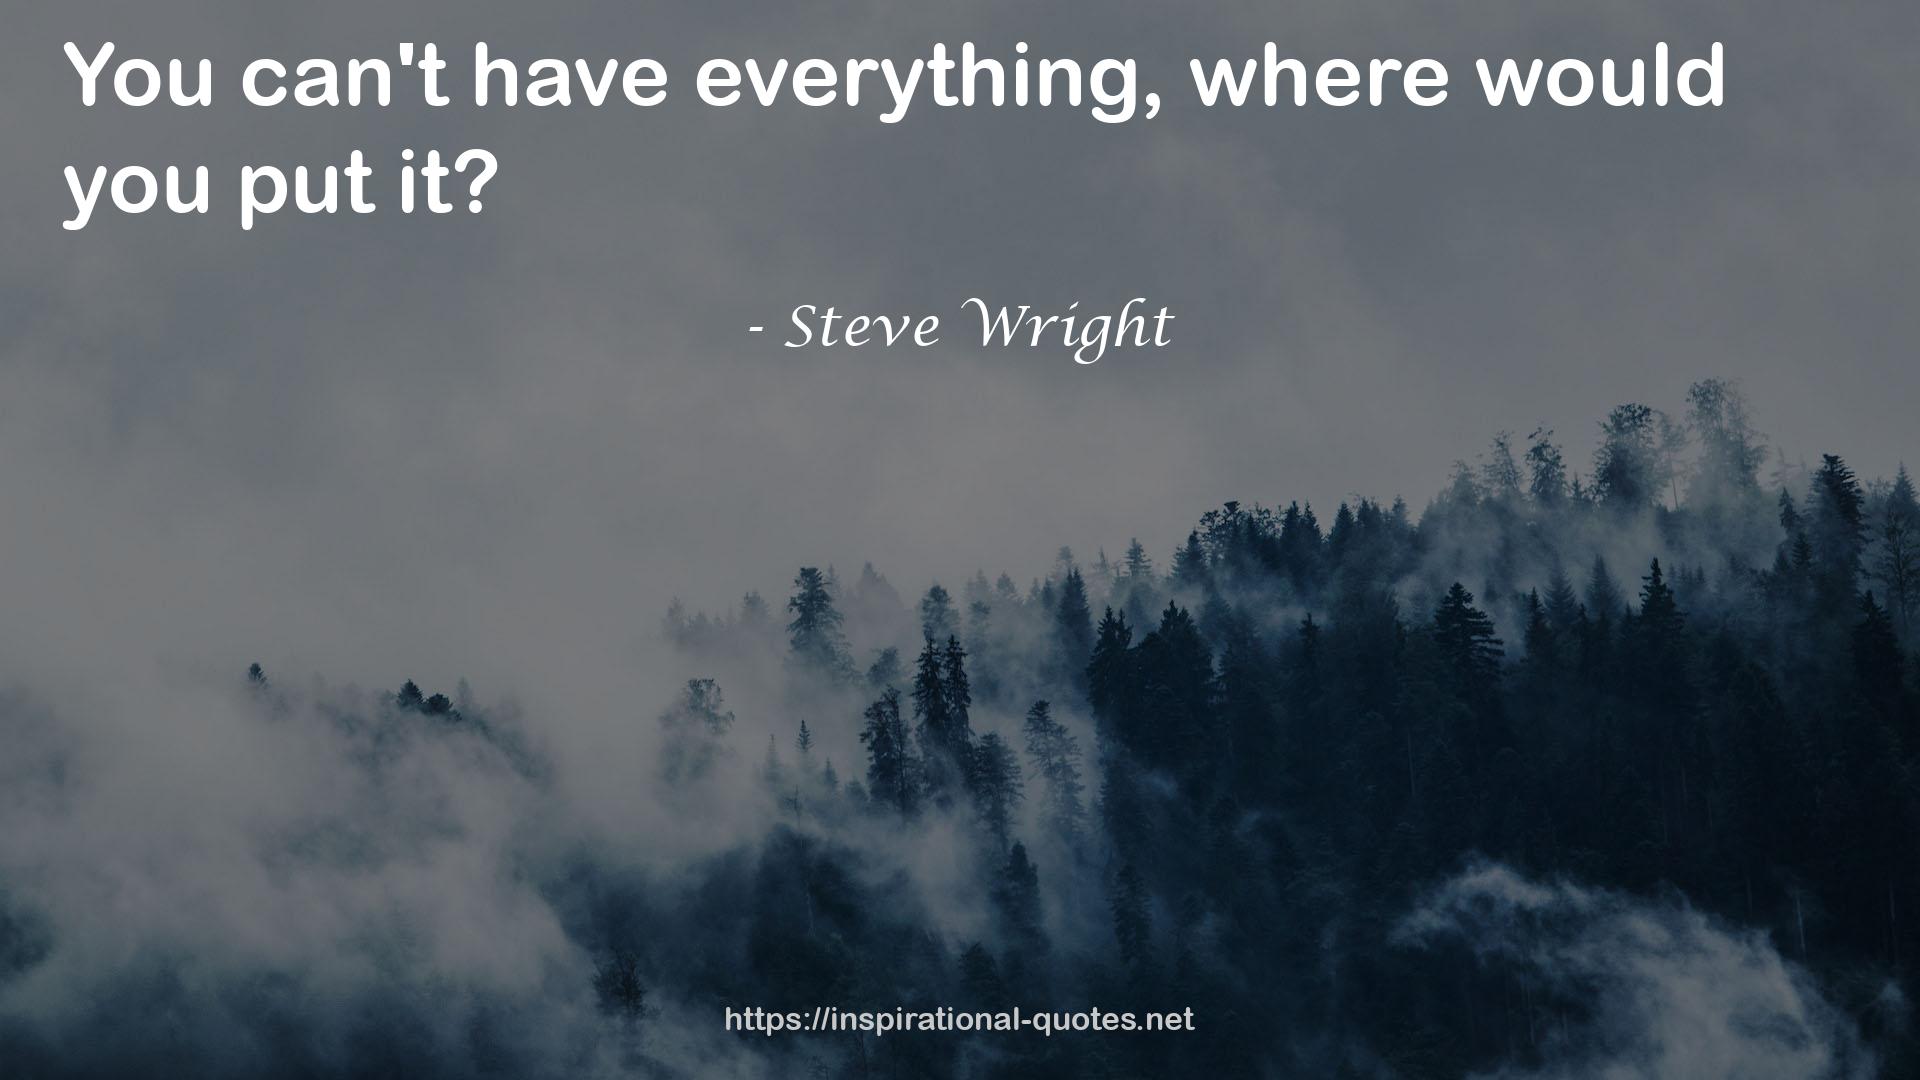 Steve Wright QUOTES